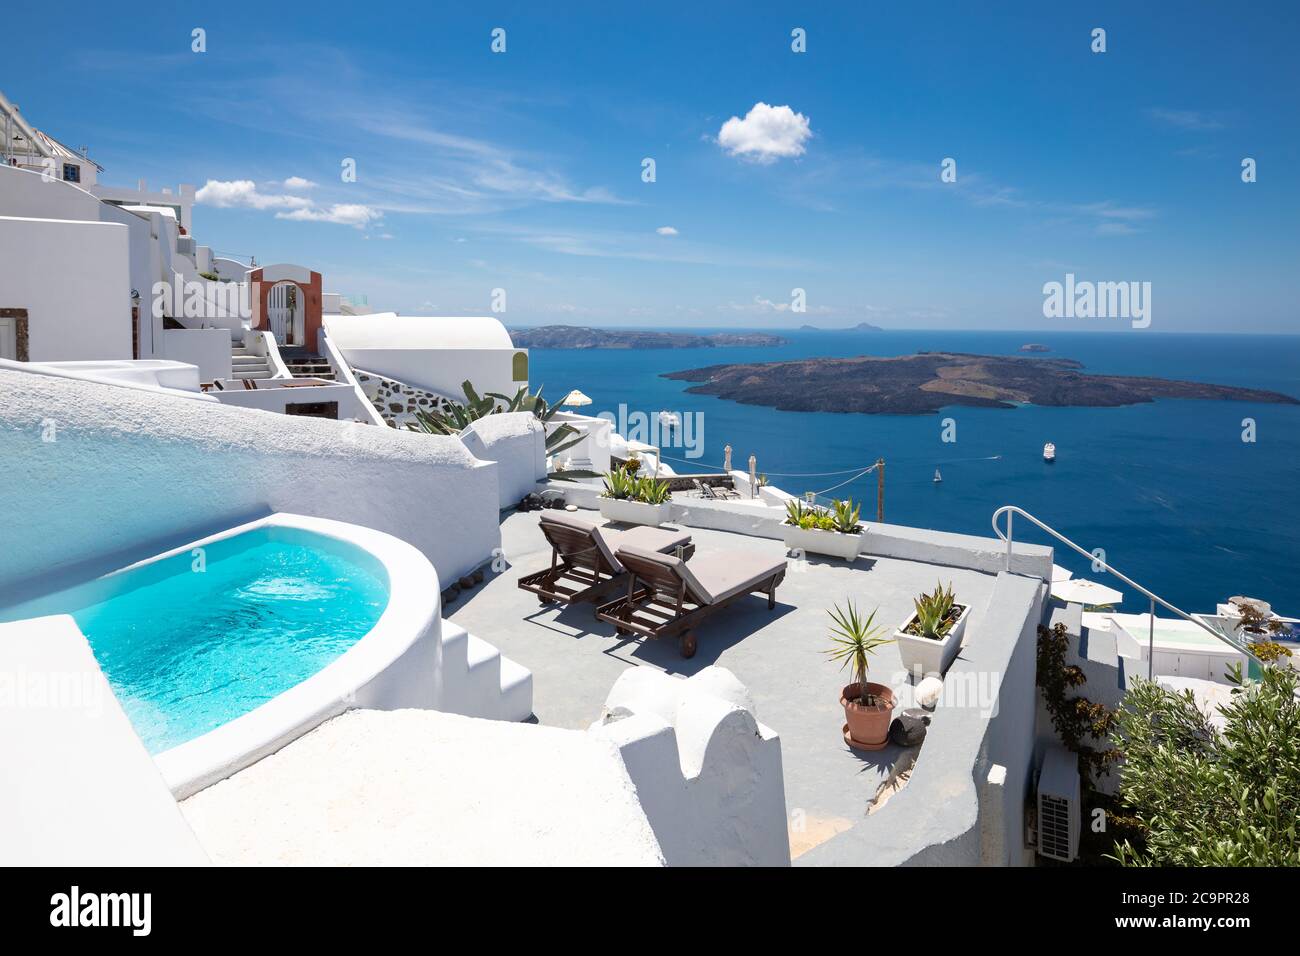 Swimming poolside, infinity pool relaxation view out over the sea caldera of Santorini Greece. Luxury travel, summer holiday vacation, peaceful resort Stock Photo